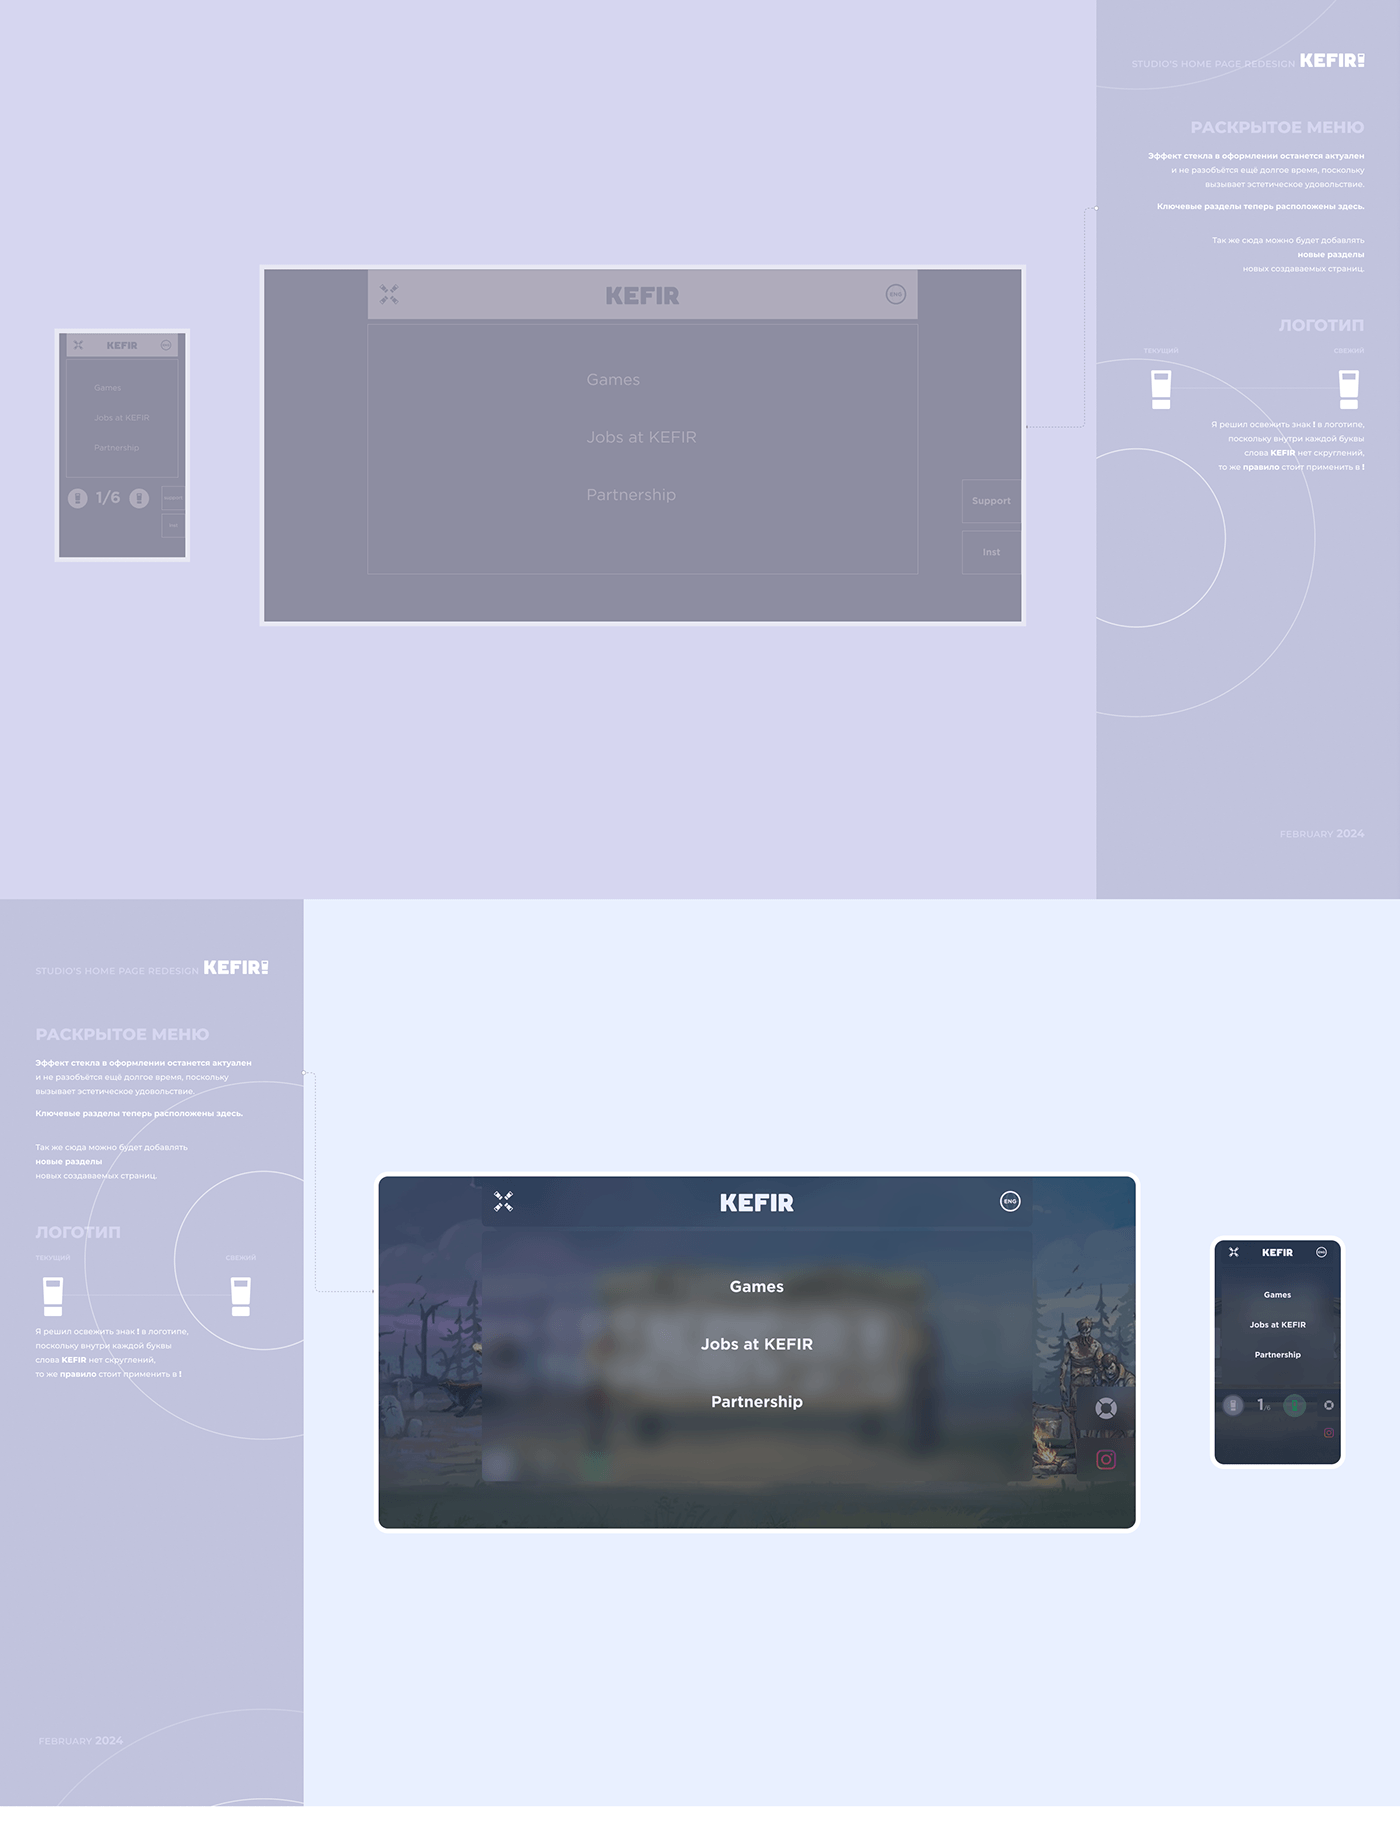 Web design ux UI user interface user experience concept